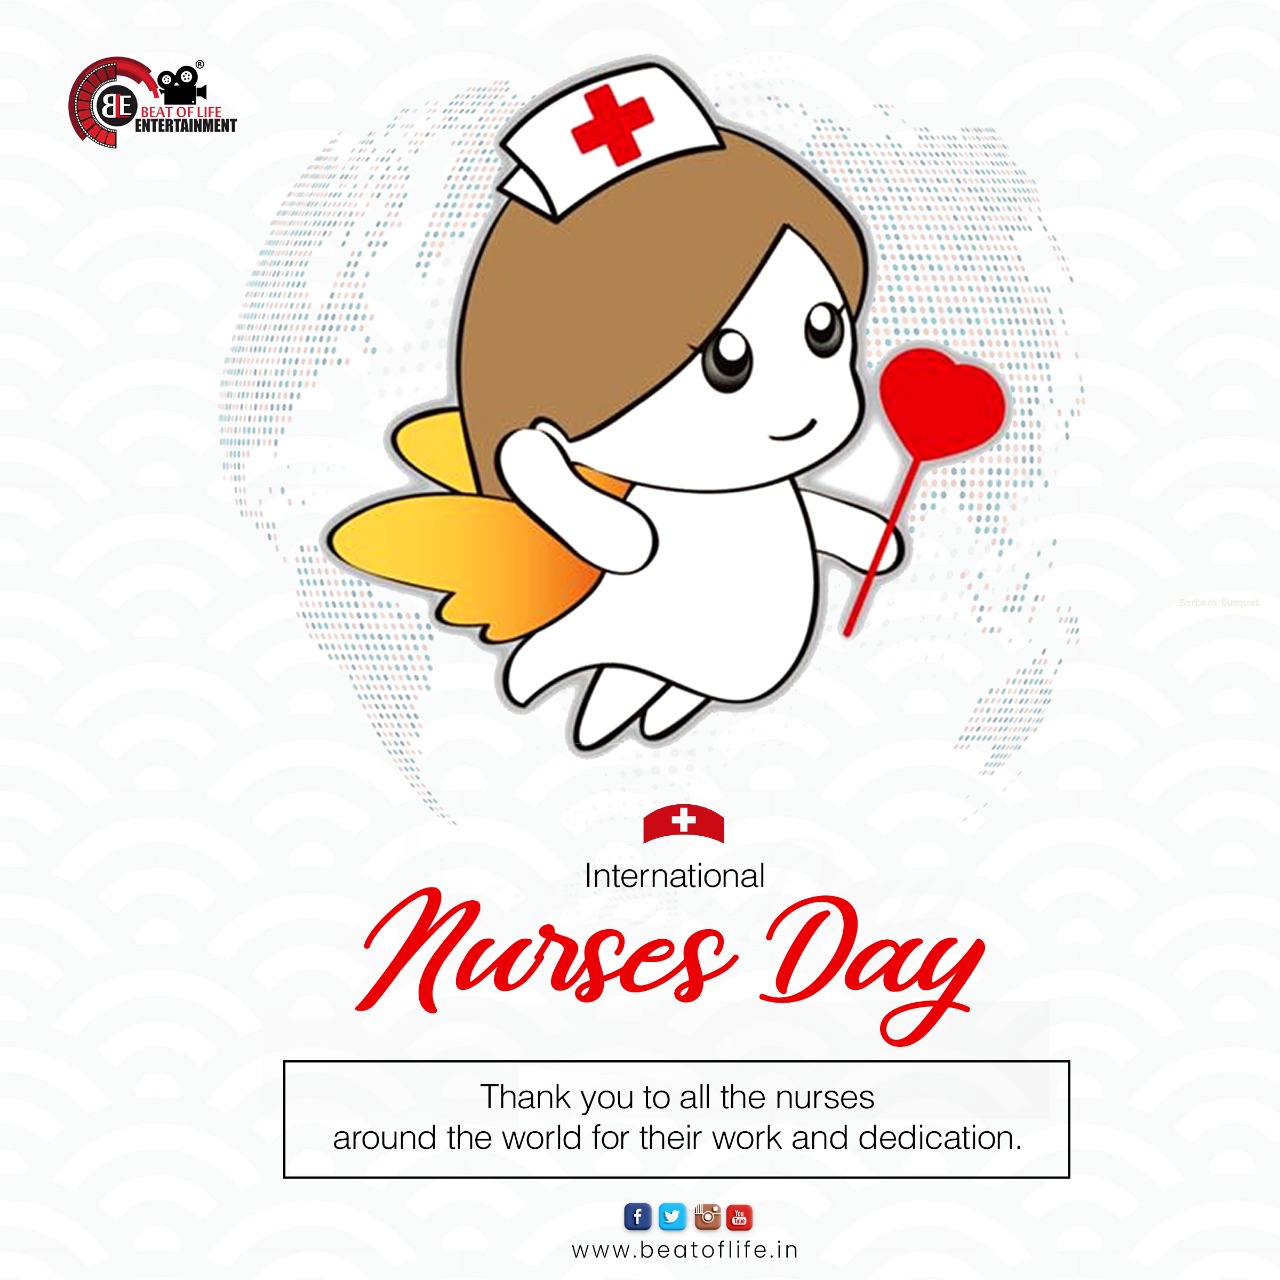 International Nurses Day is celebrated on 12th May every year. It ...